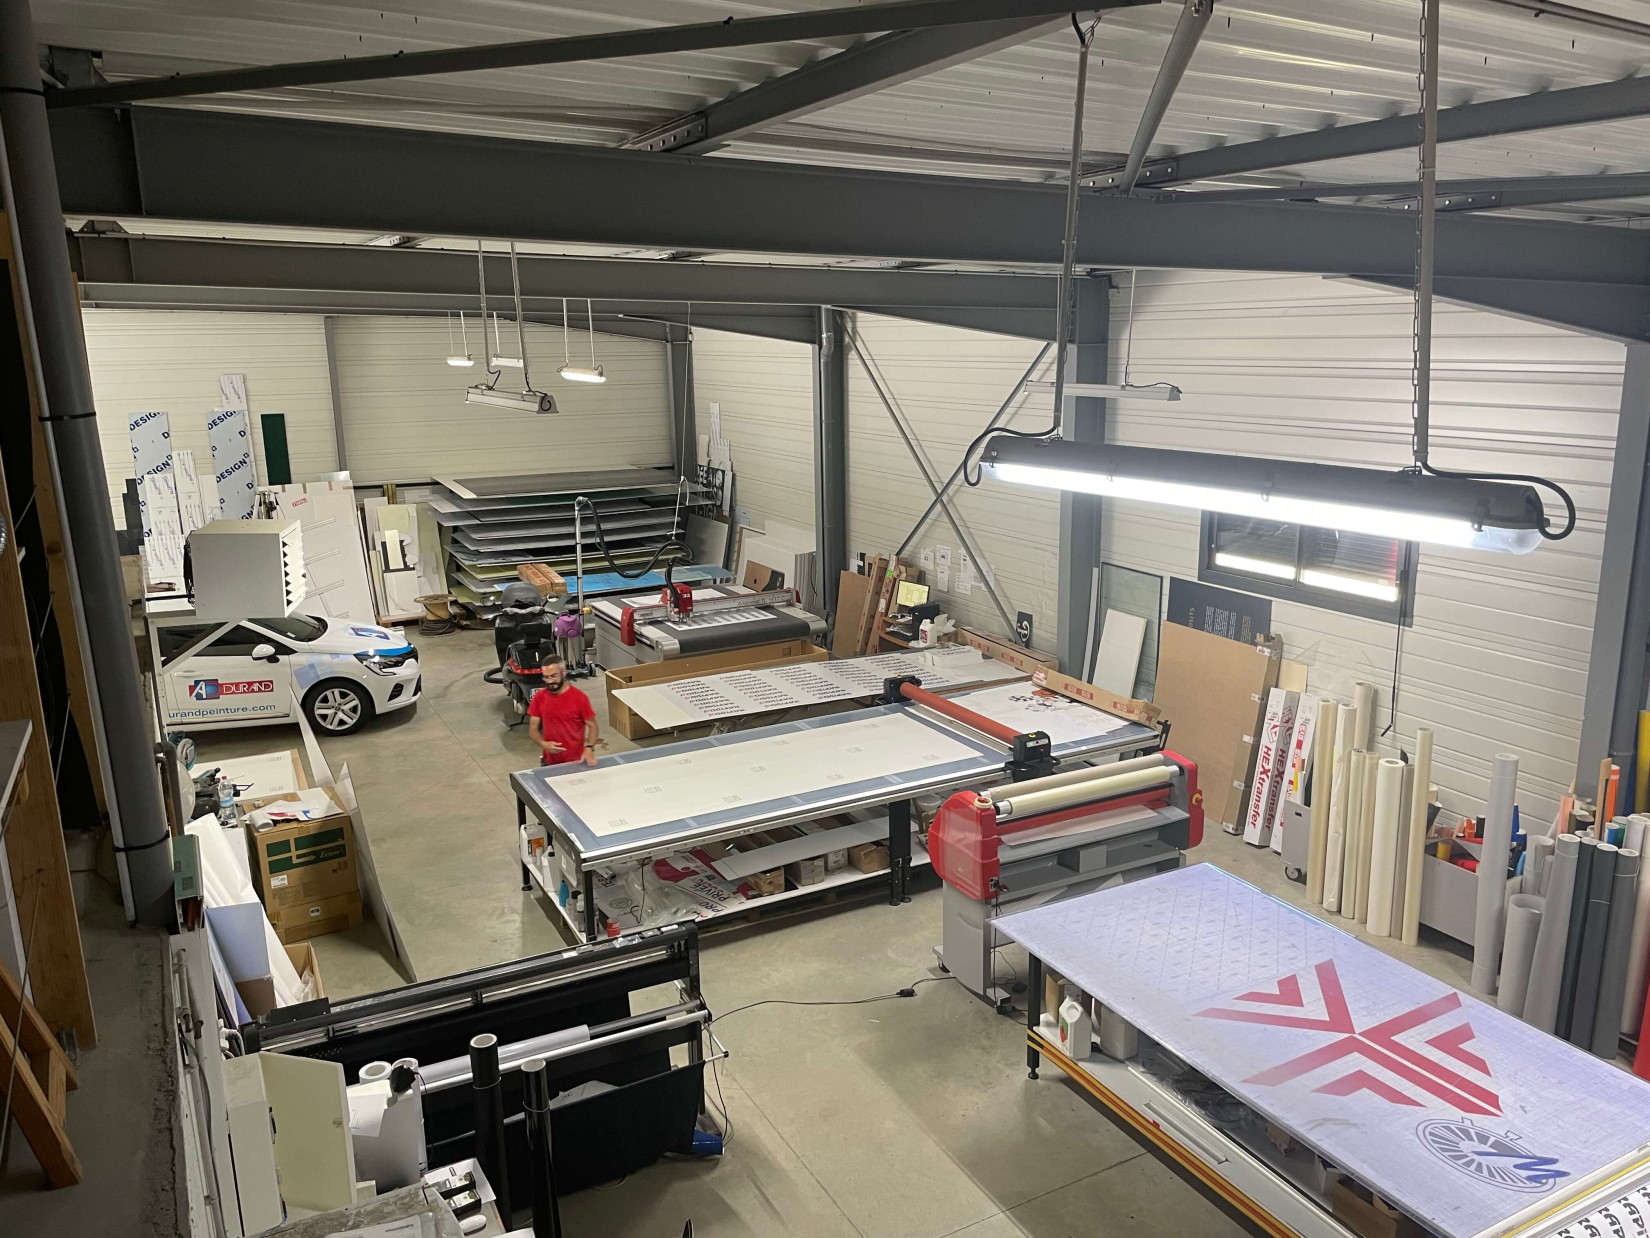 Workshop contains the necessary printers, cutting machines and other equipment to carry out large format signage assignments.